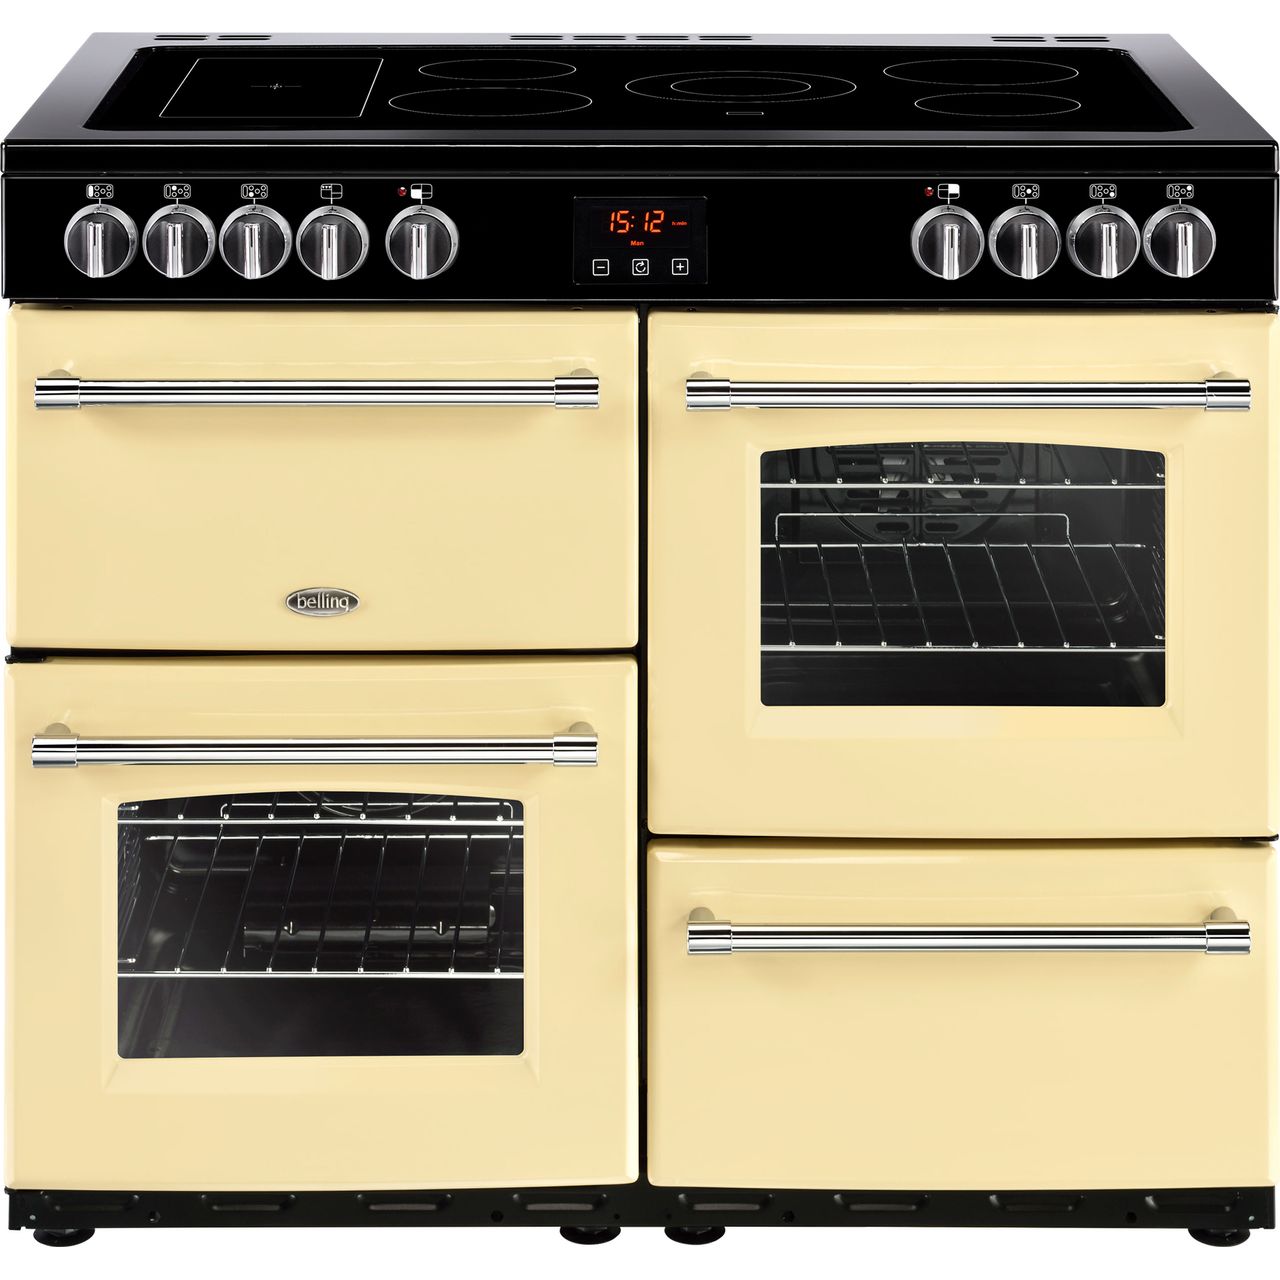 Belling Farmhouse100E 100cm Electric Range Cooker with Ceramic Hob Review